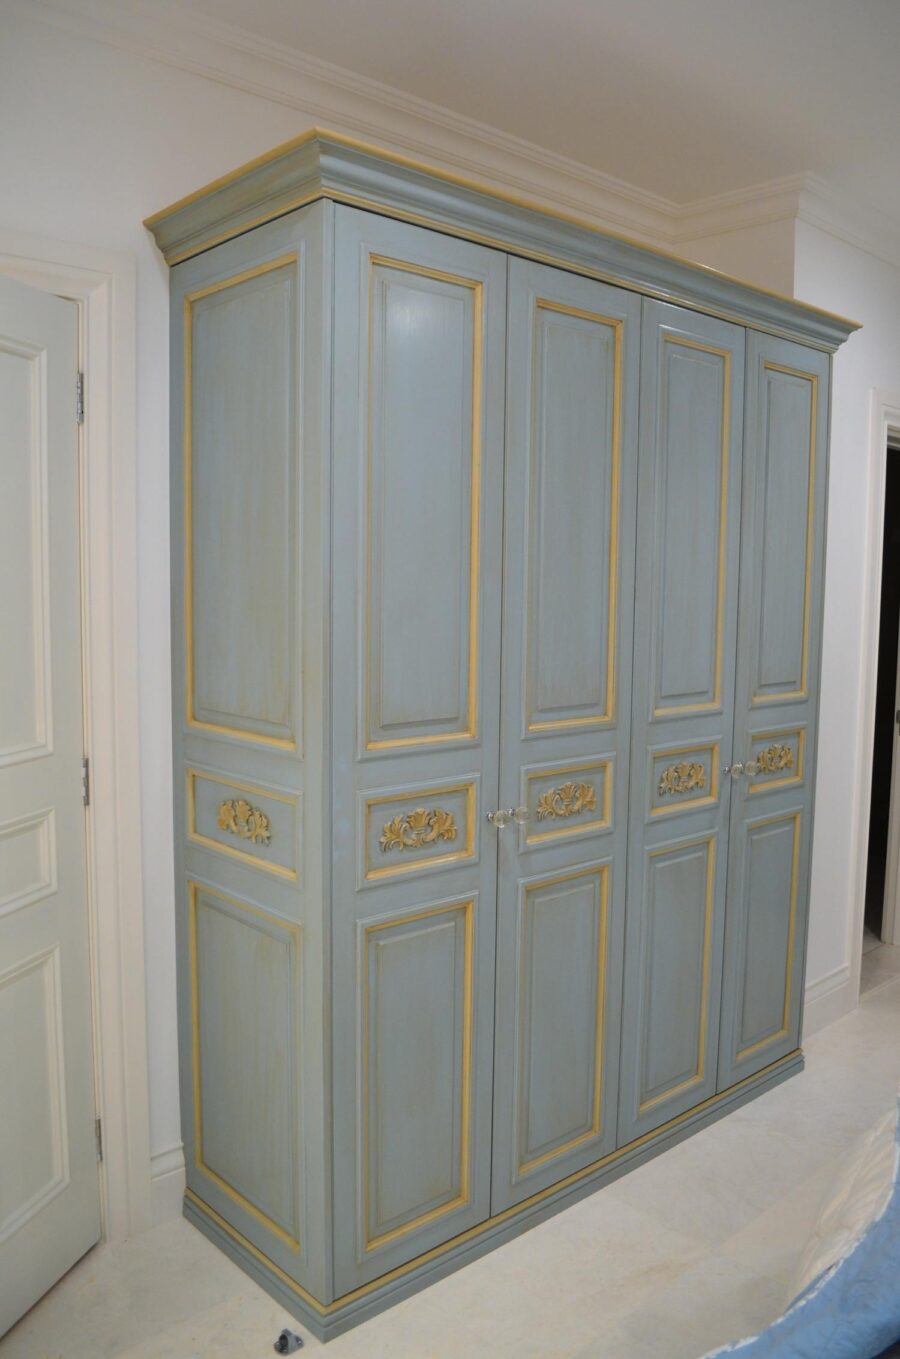 French provincial wardrobe in blue